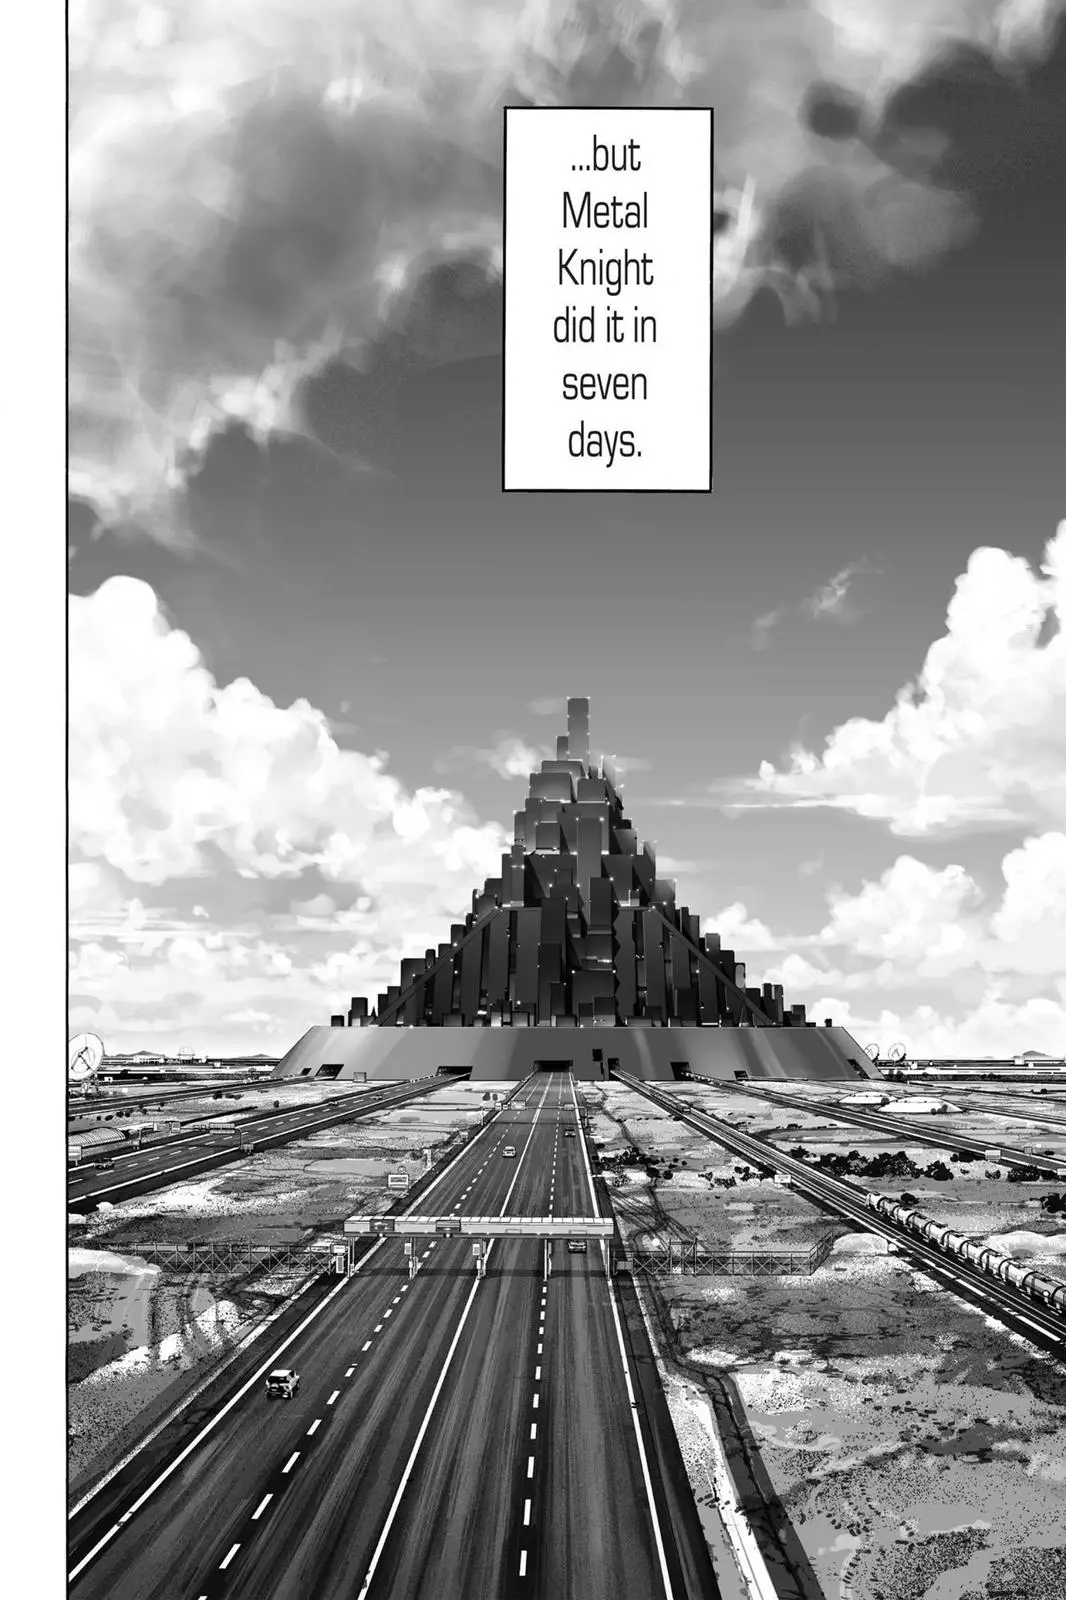 One Punch Man Chapter 37.5, READ One Punch Man Chapter 37.5 ONLINE, lost in the cloud genre,lost in the cloud gif,lost in the cloud girl,lost in the cloud goods,lost in the cloud goodreads,lost in the cloud,lost ark cloud gaming,lost odyssey cloud gaming,lost in the cloud fanart,lost in the cloud fanfic,lost in the cloud fandom,lost in the cloud first kiss,lost in the cloud font,lost in the cloud ending,lost in the cloud episode 97,lost in the cloud edit,lost in the cloud explained,lost in the cloud dog,lost in the cloud discord server,lost in the cloud desktop wallpaper,lost in the cloud drawing,can't find my cloud on network,lost in the cloud characters,lost in the cloud chapter 93 release date,lost in the cloud birthday,lost in the cloud birthday art,lost in the cloud background,lost in the cloud banner,lost in the clouds meaning,what is the black cloud in lost,lost in the cloud ao3,lost in the cloud anime,lost in the cloud art,lost in the cloud author twitter,lost in the cloud author instagram,lost in the cloud artist,lost in the cloud acrylic stand,lost in the cloud artist twitter,lost in the cloud art style,lost in the cloud analysis